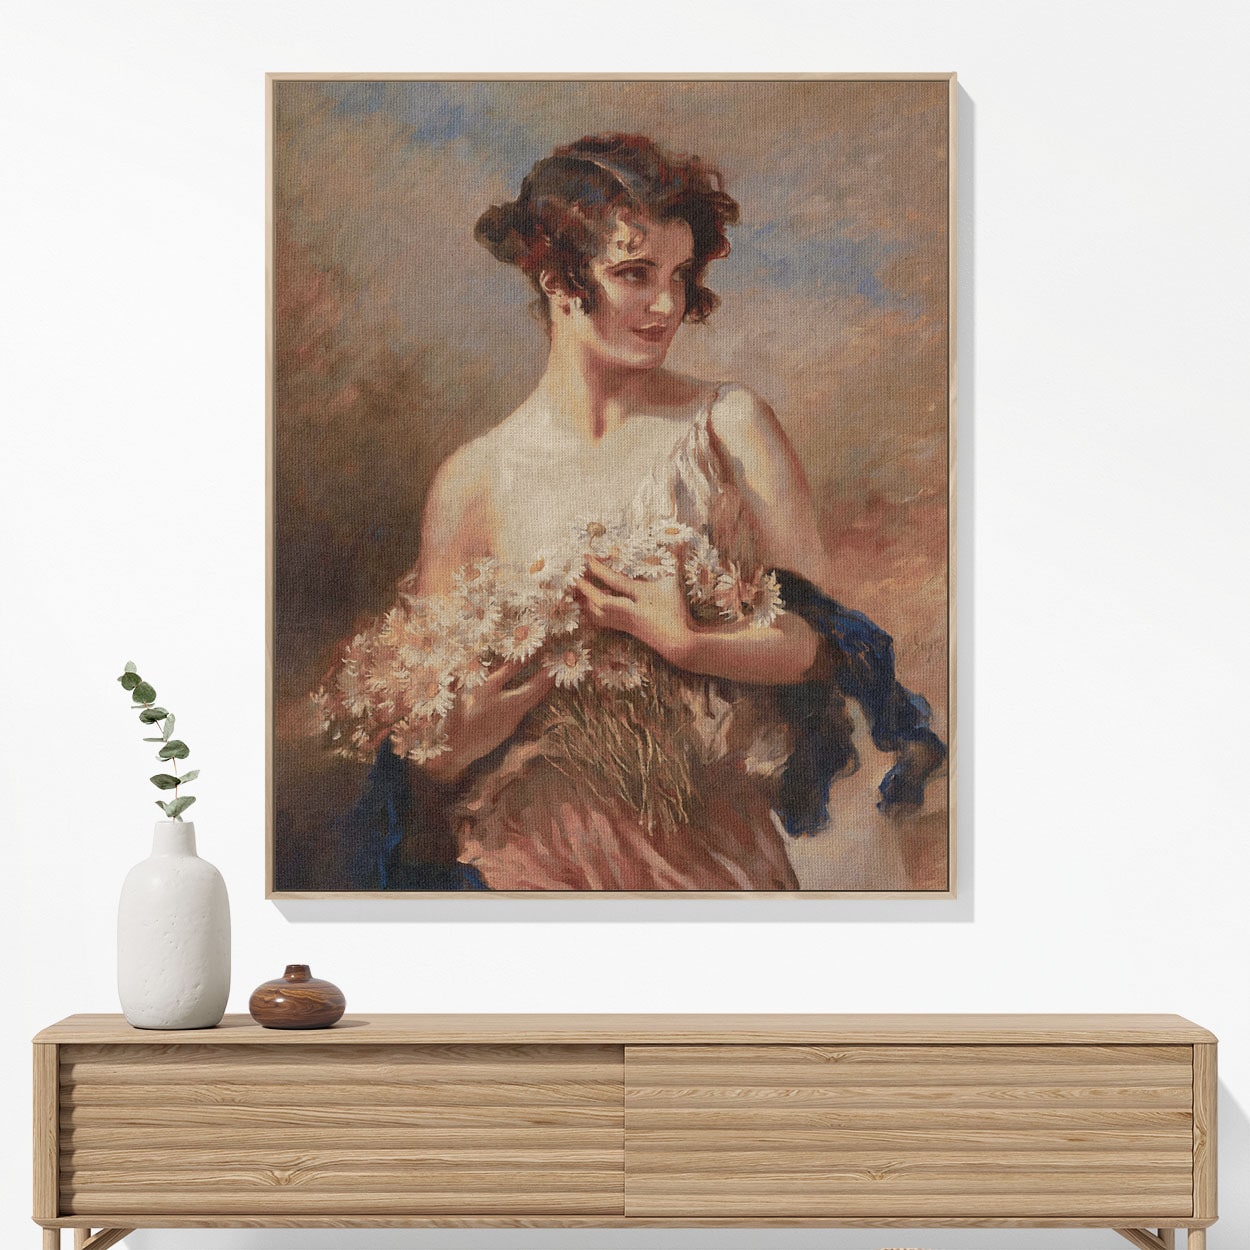 Hands Full of Flowers Woven Blanket Woven Blanket Hanging on a Wall as Framed Wall Art